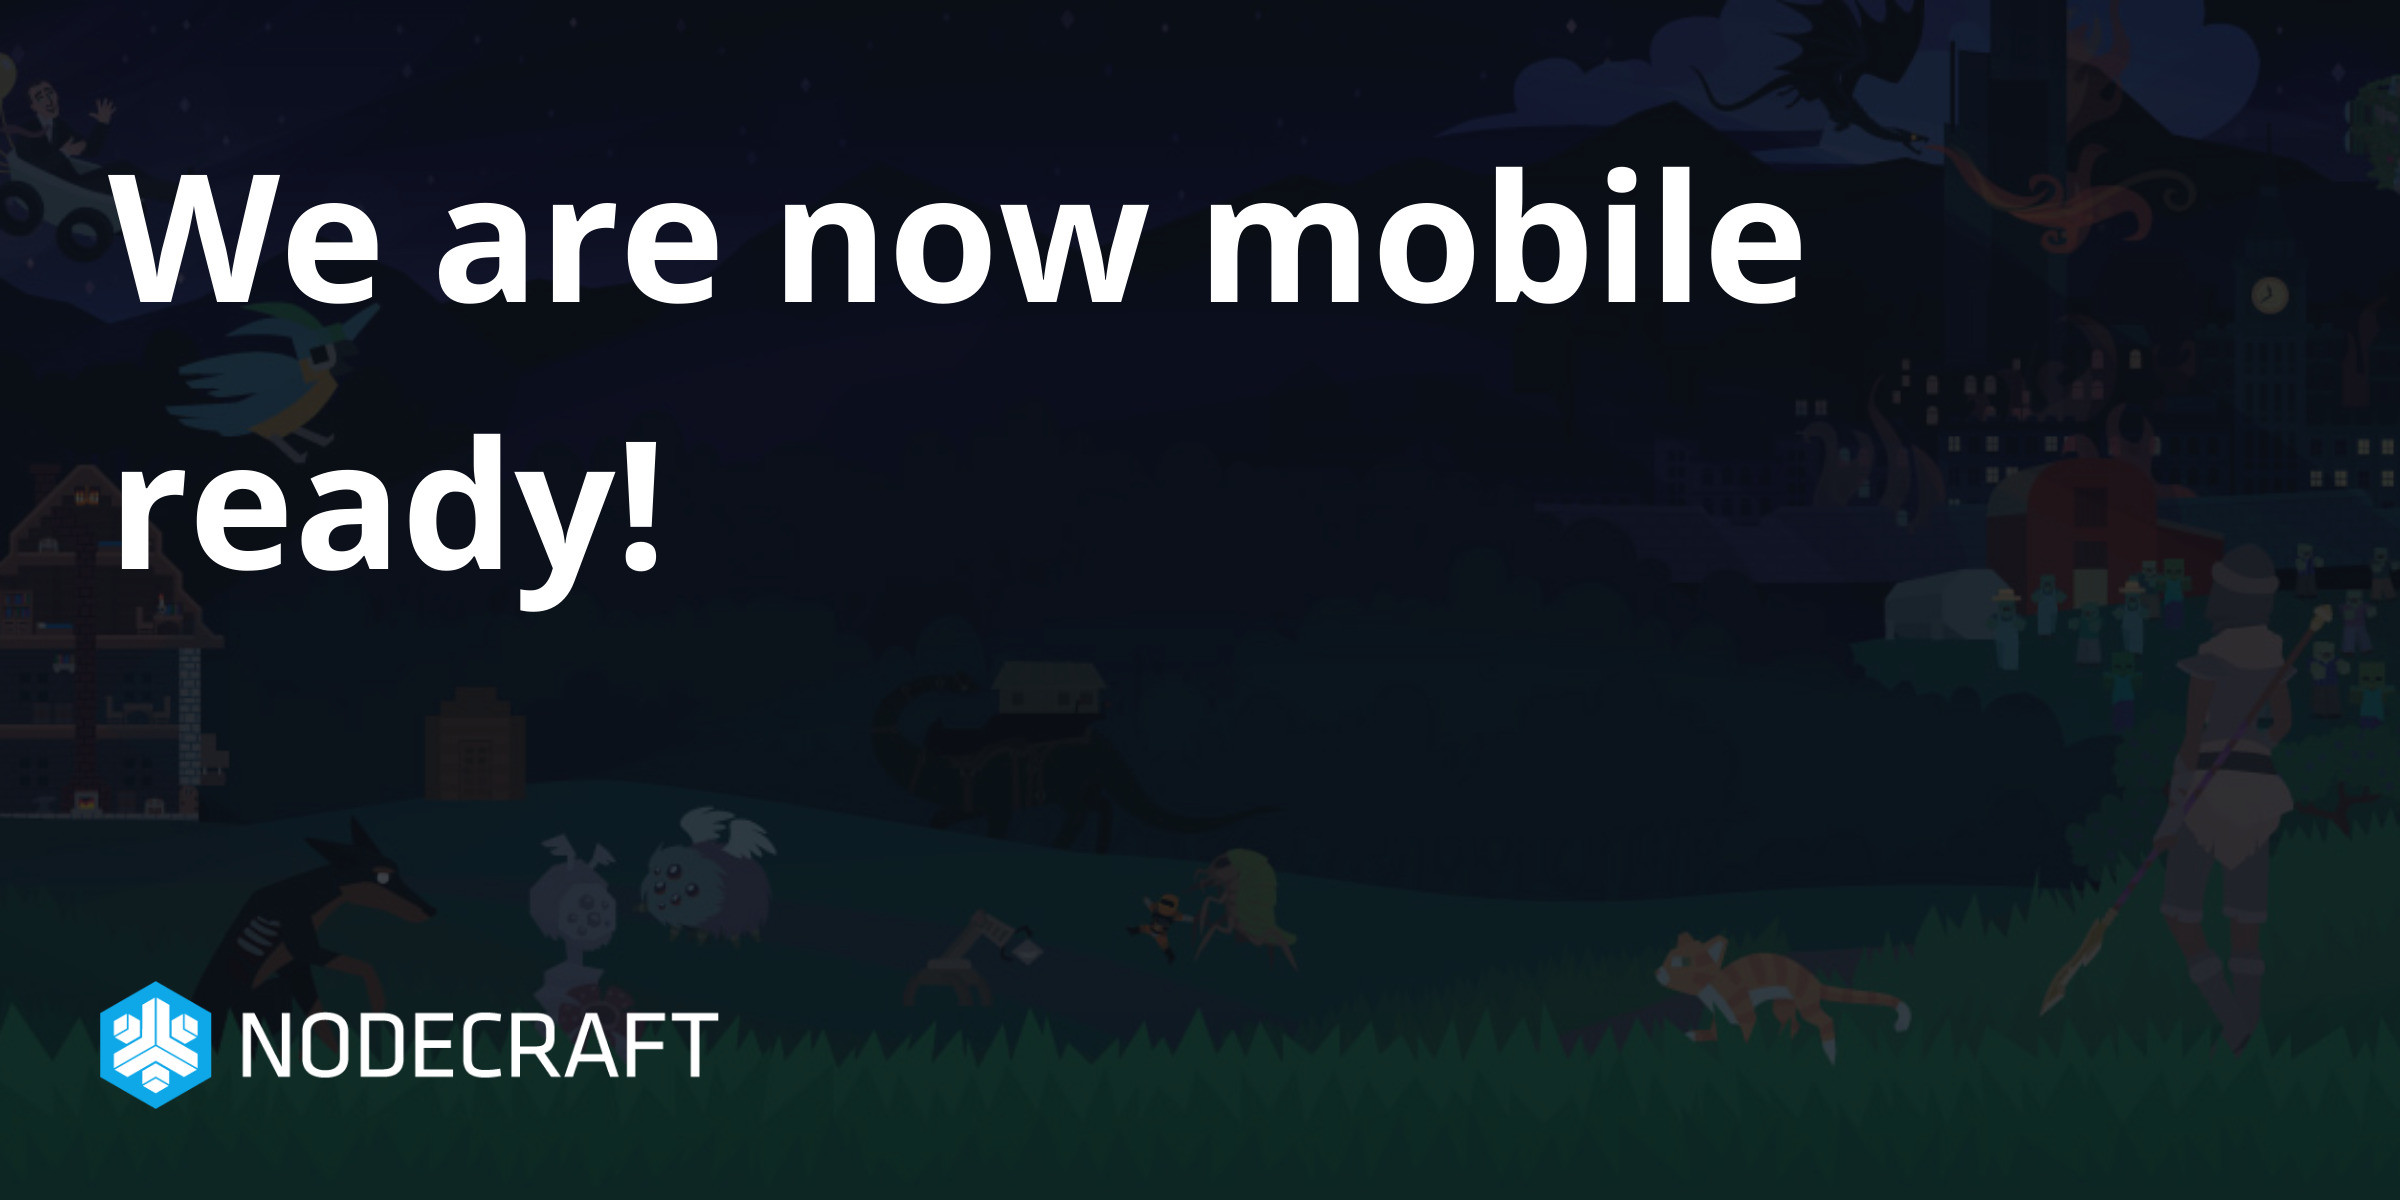 We are now mobile ready!